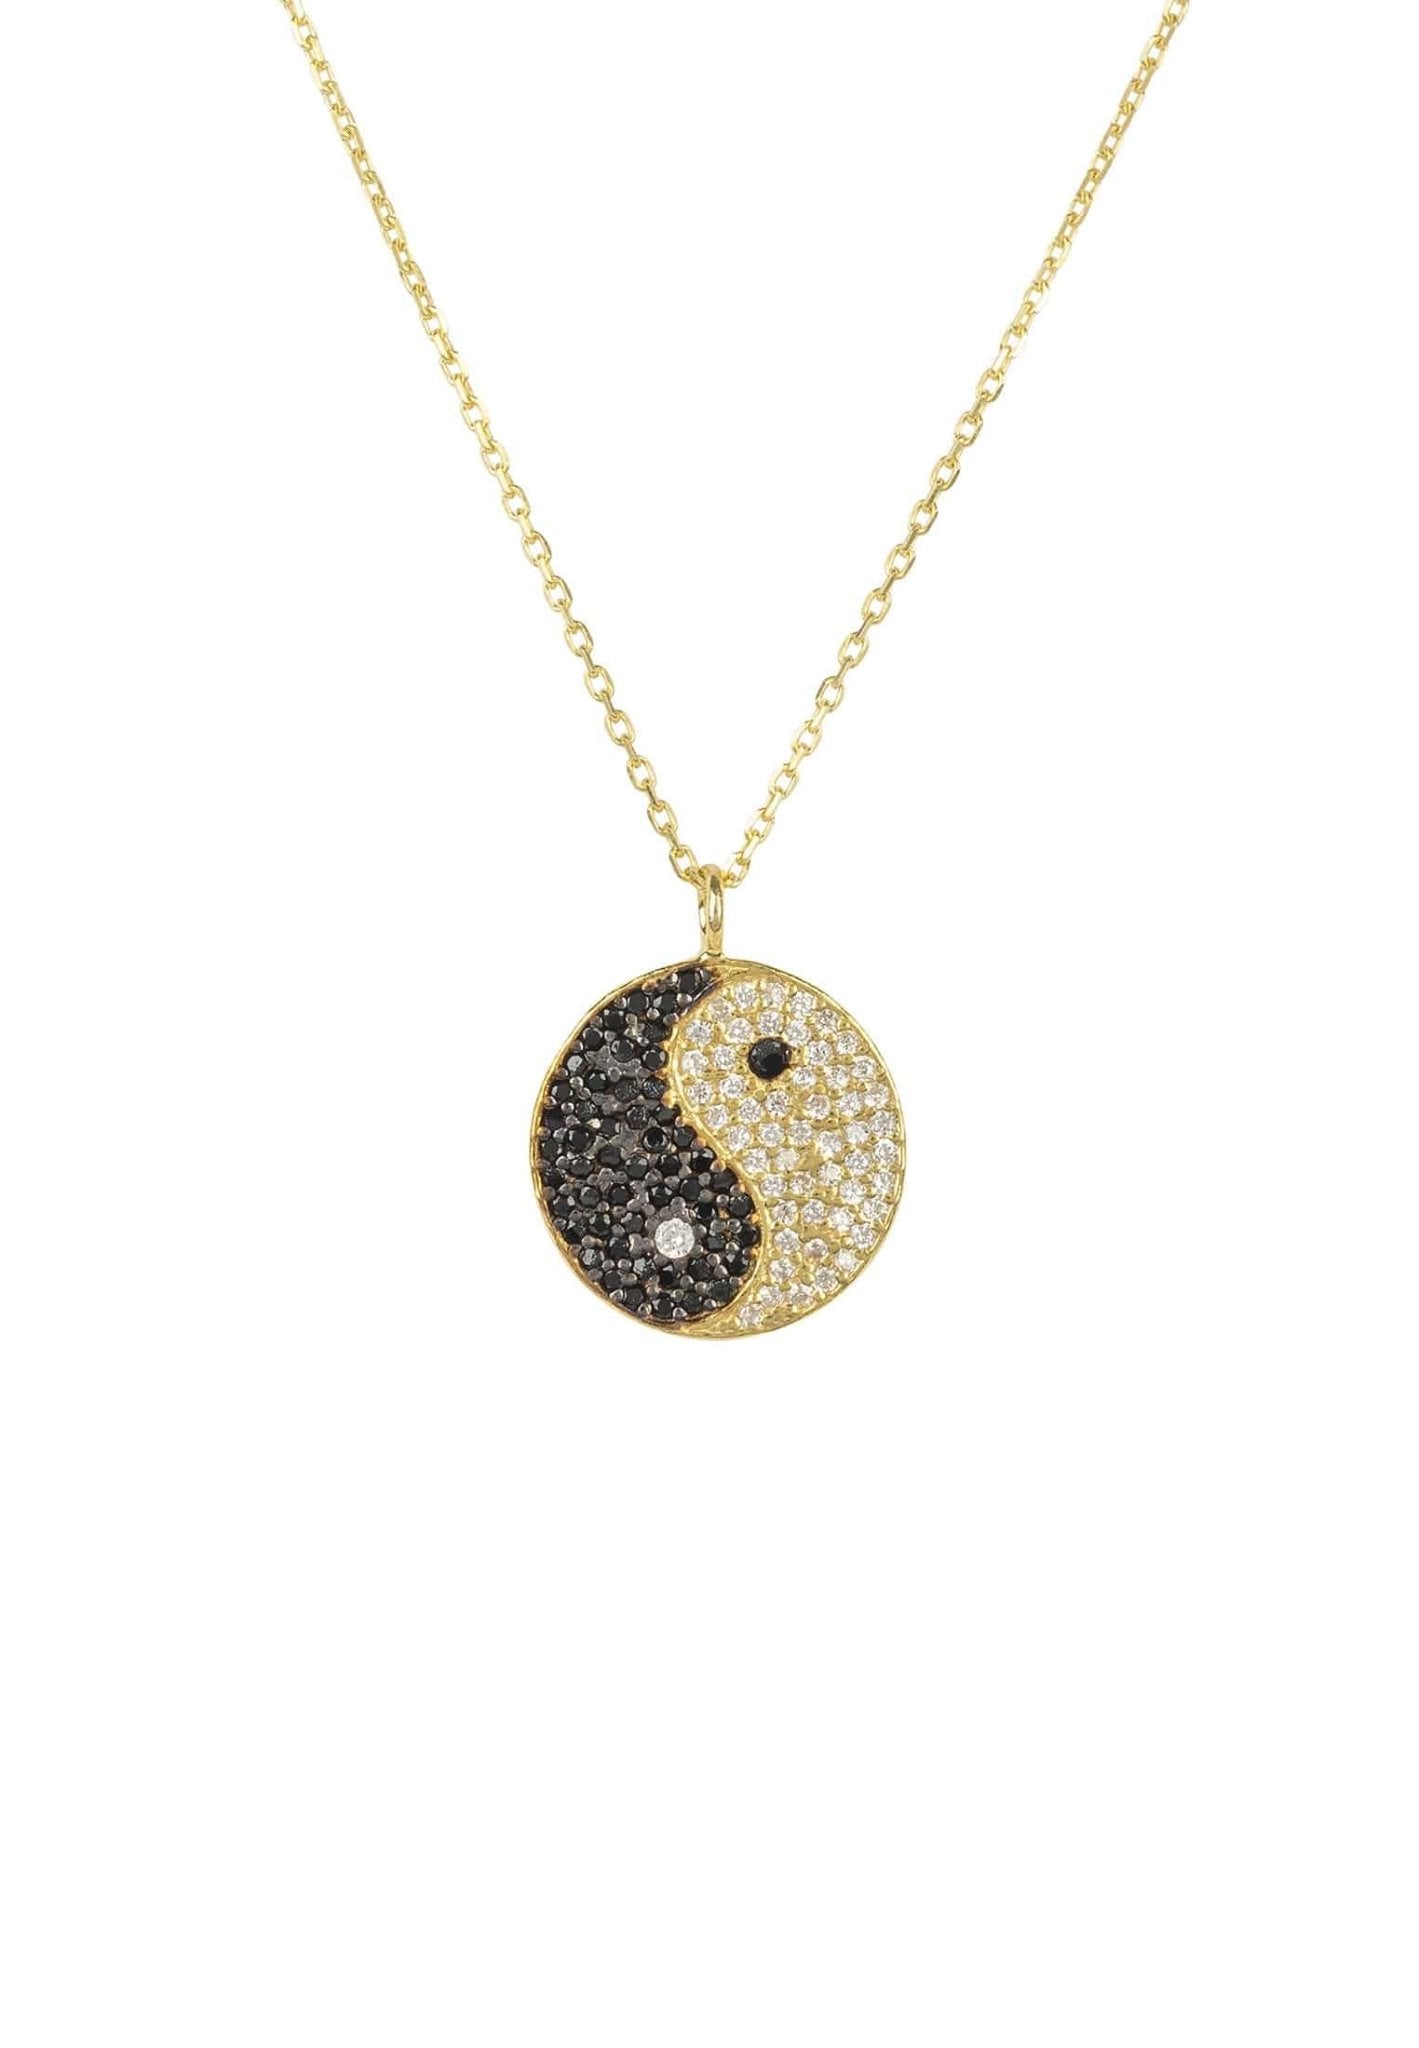 Yin And Yang Pendant Necklace Gold - LATELITA Necklaces